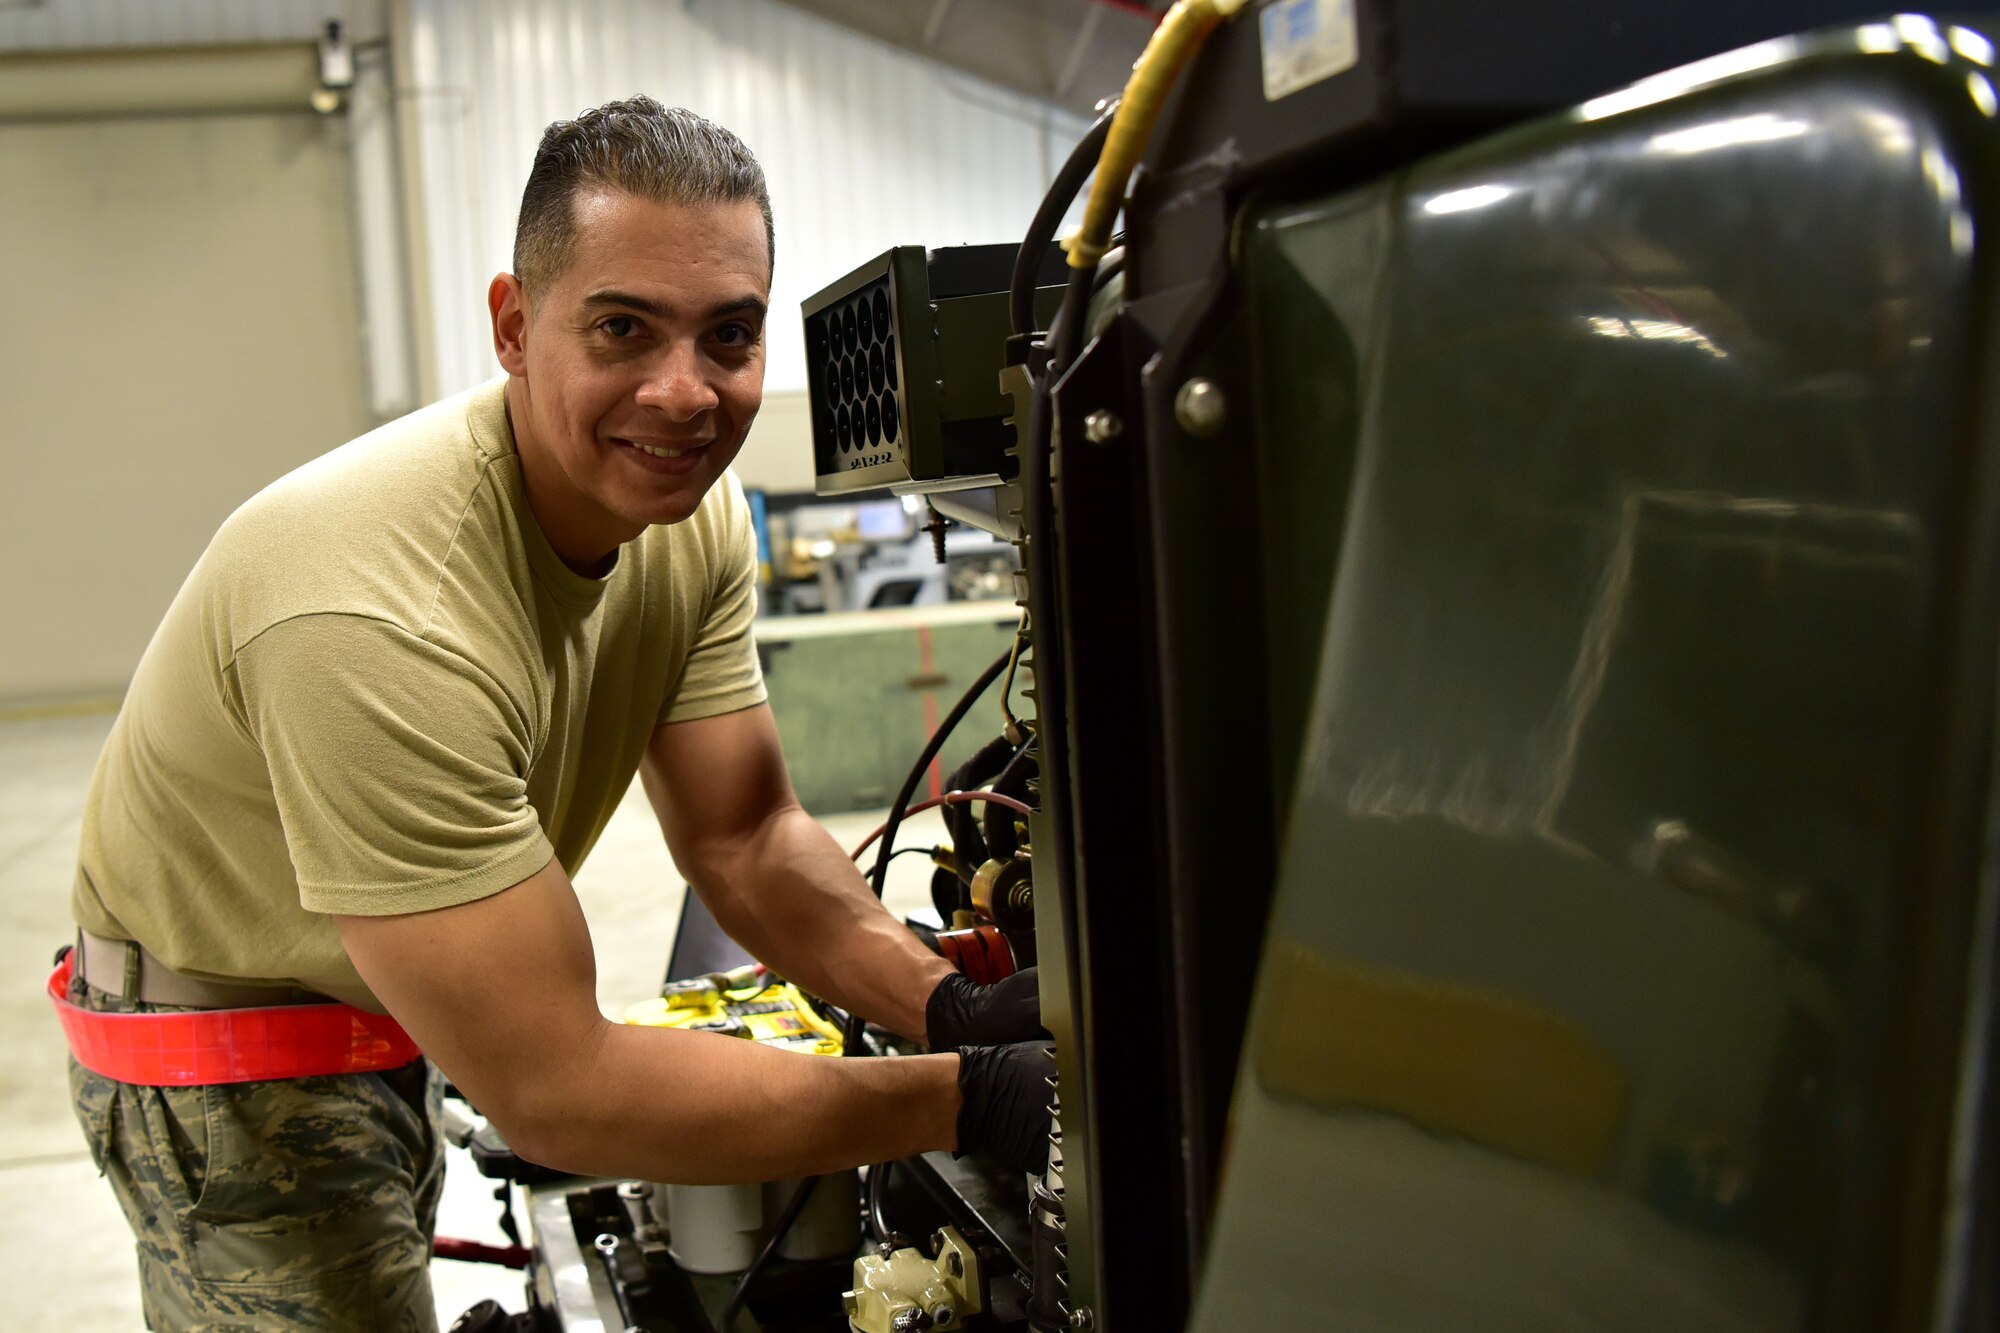 Airman poses for a photo next to a machine.